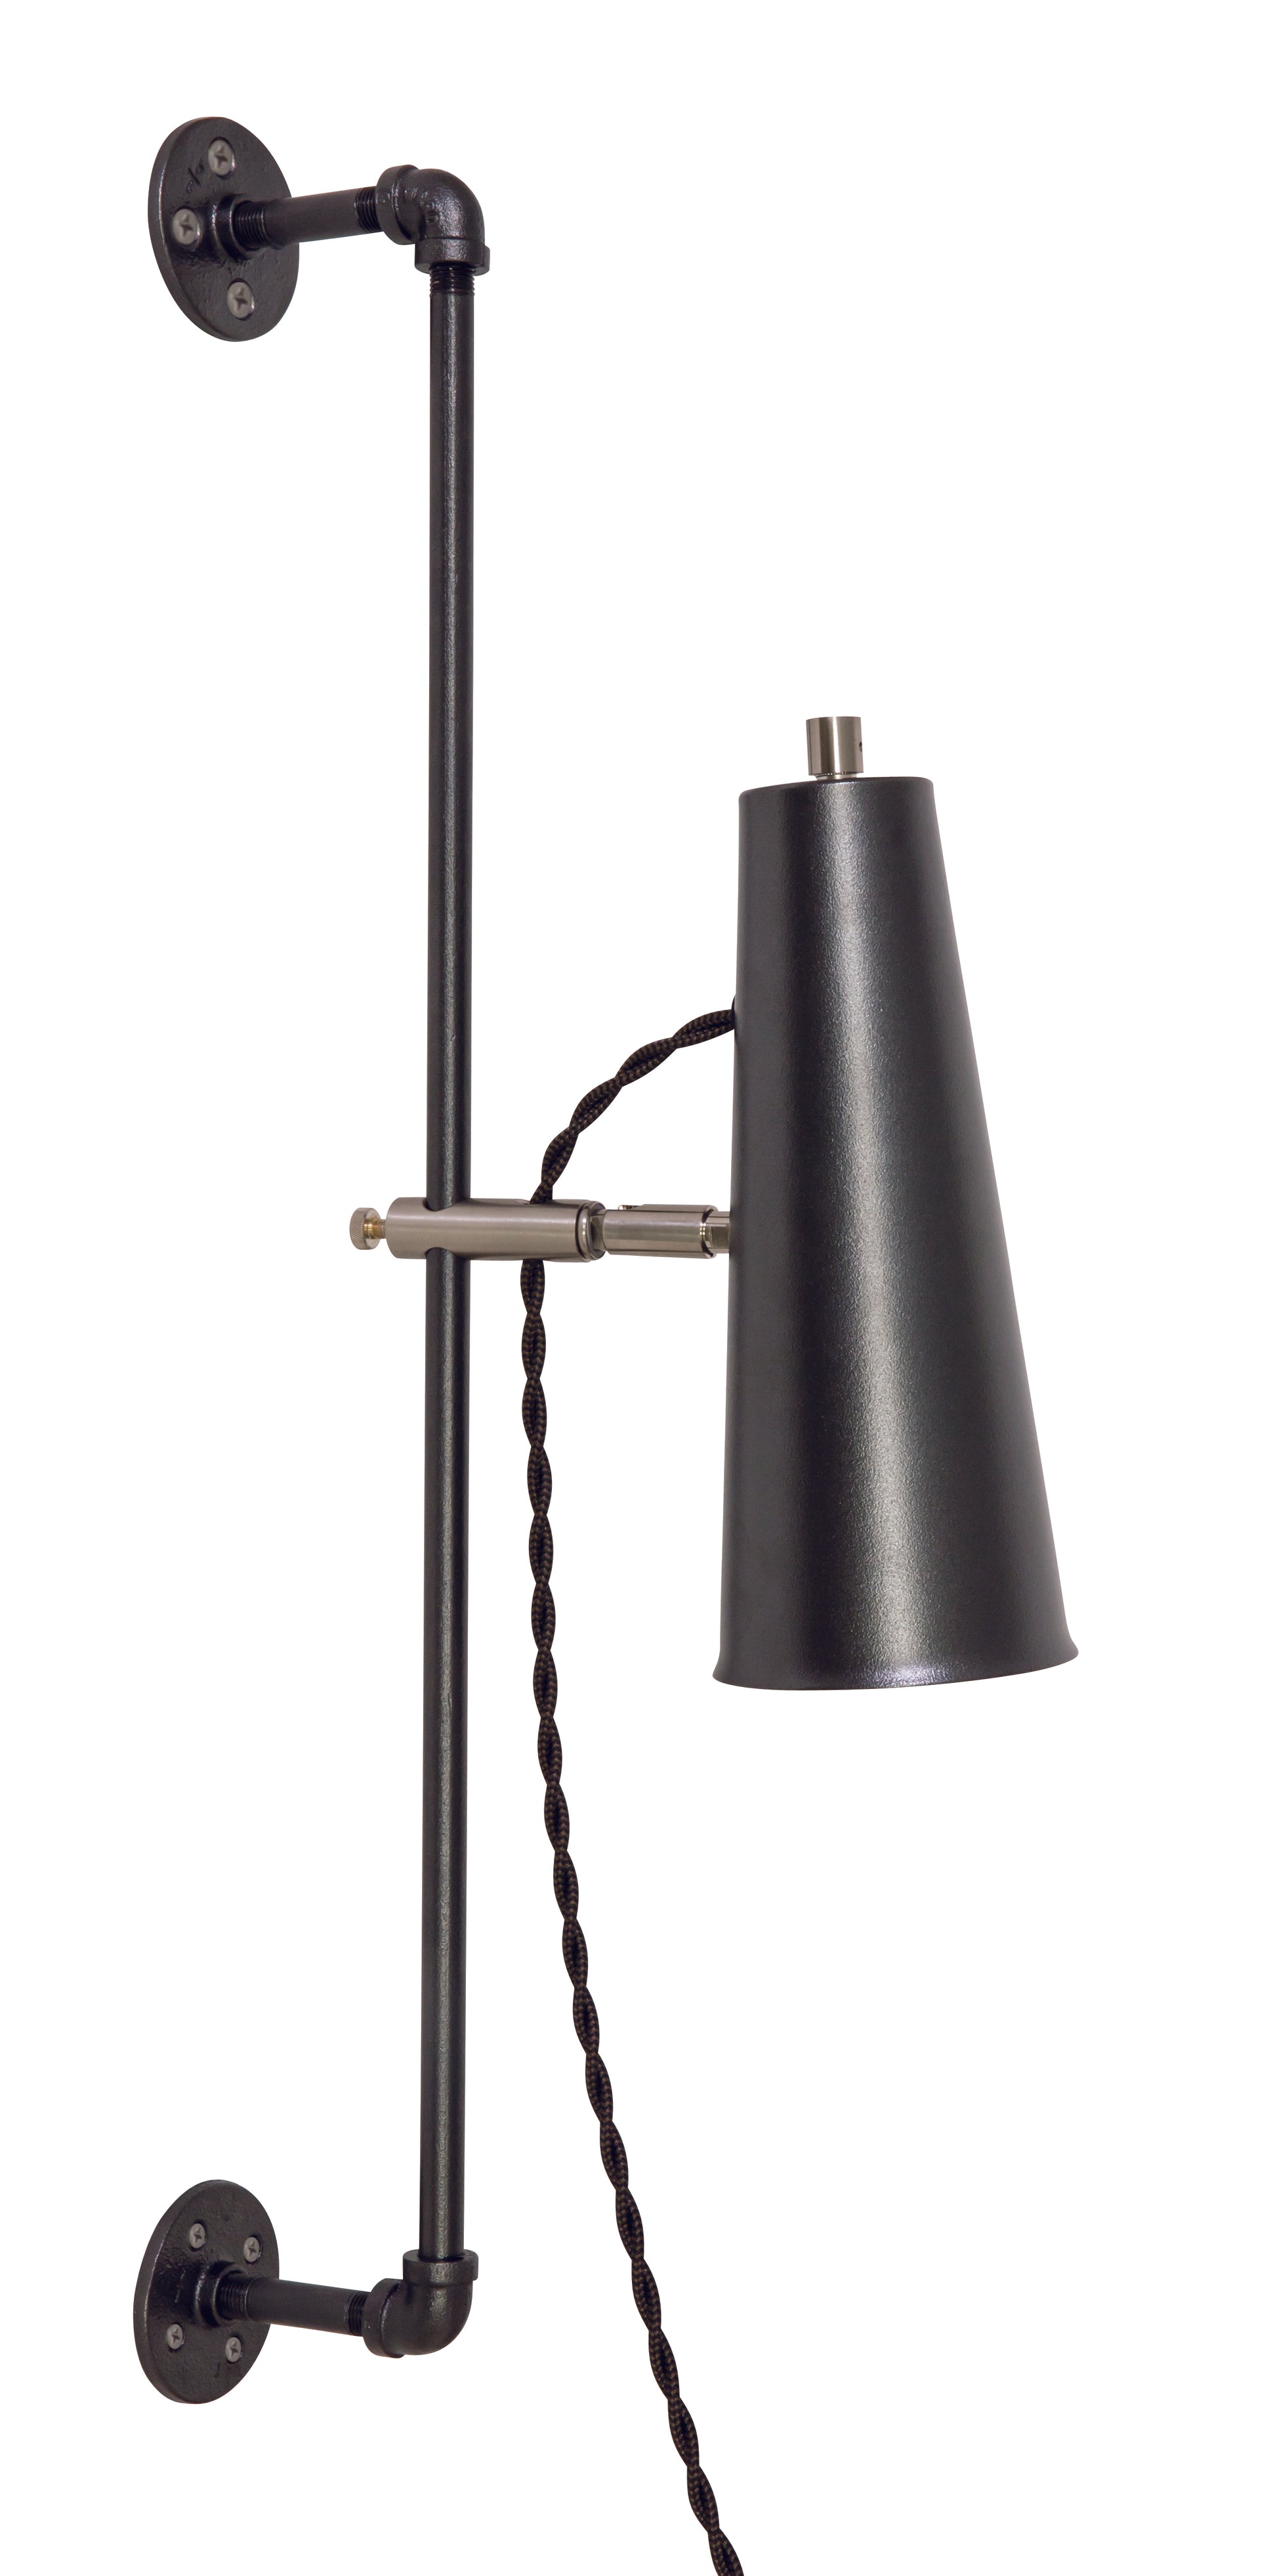 House of Troy Norton Adjustable LED Wall Lamp in Granite with Satin Nickel Accents NOR375-GTSN